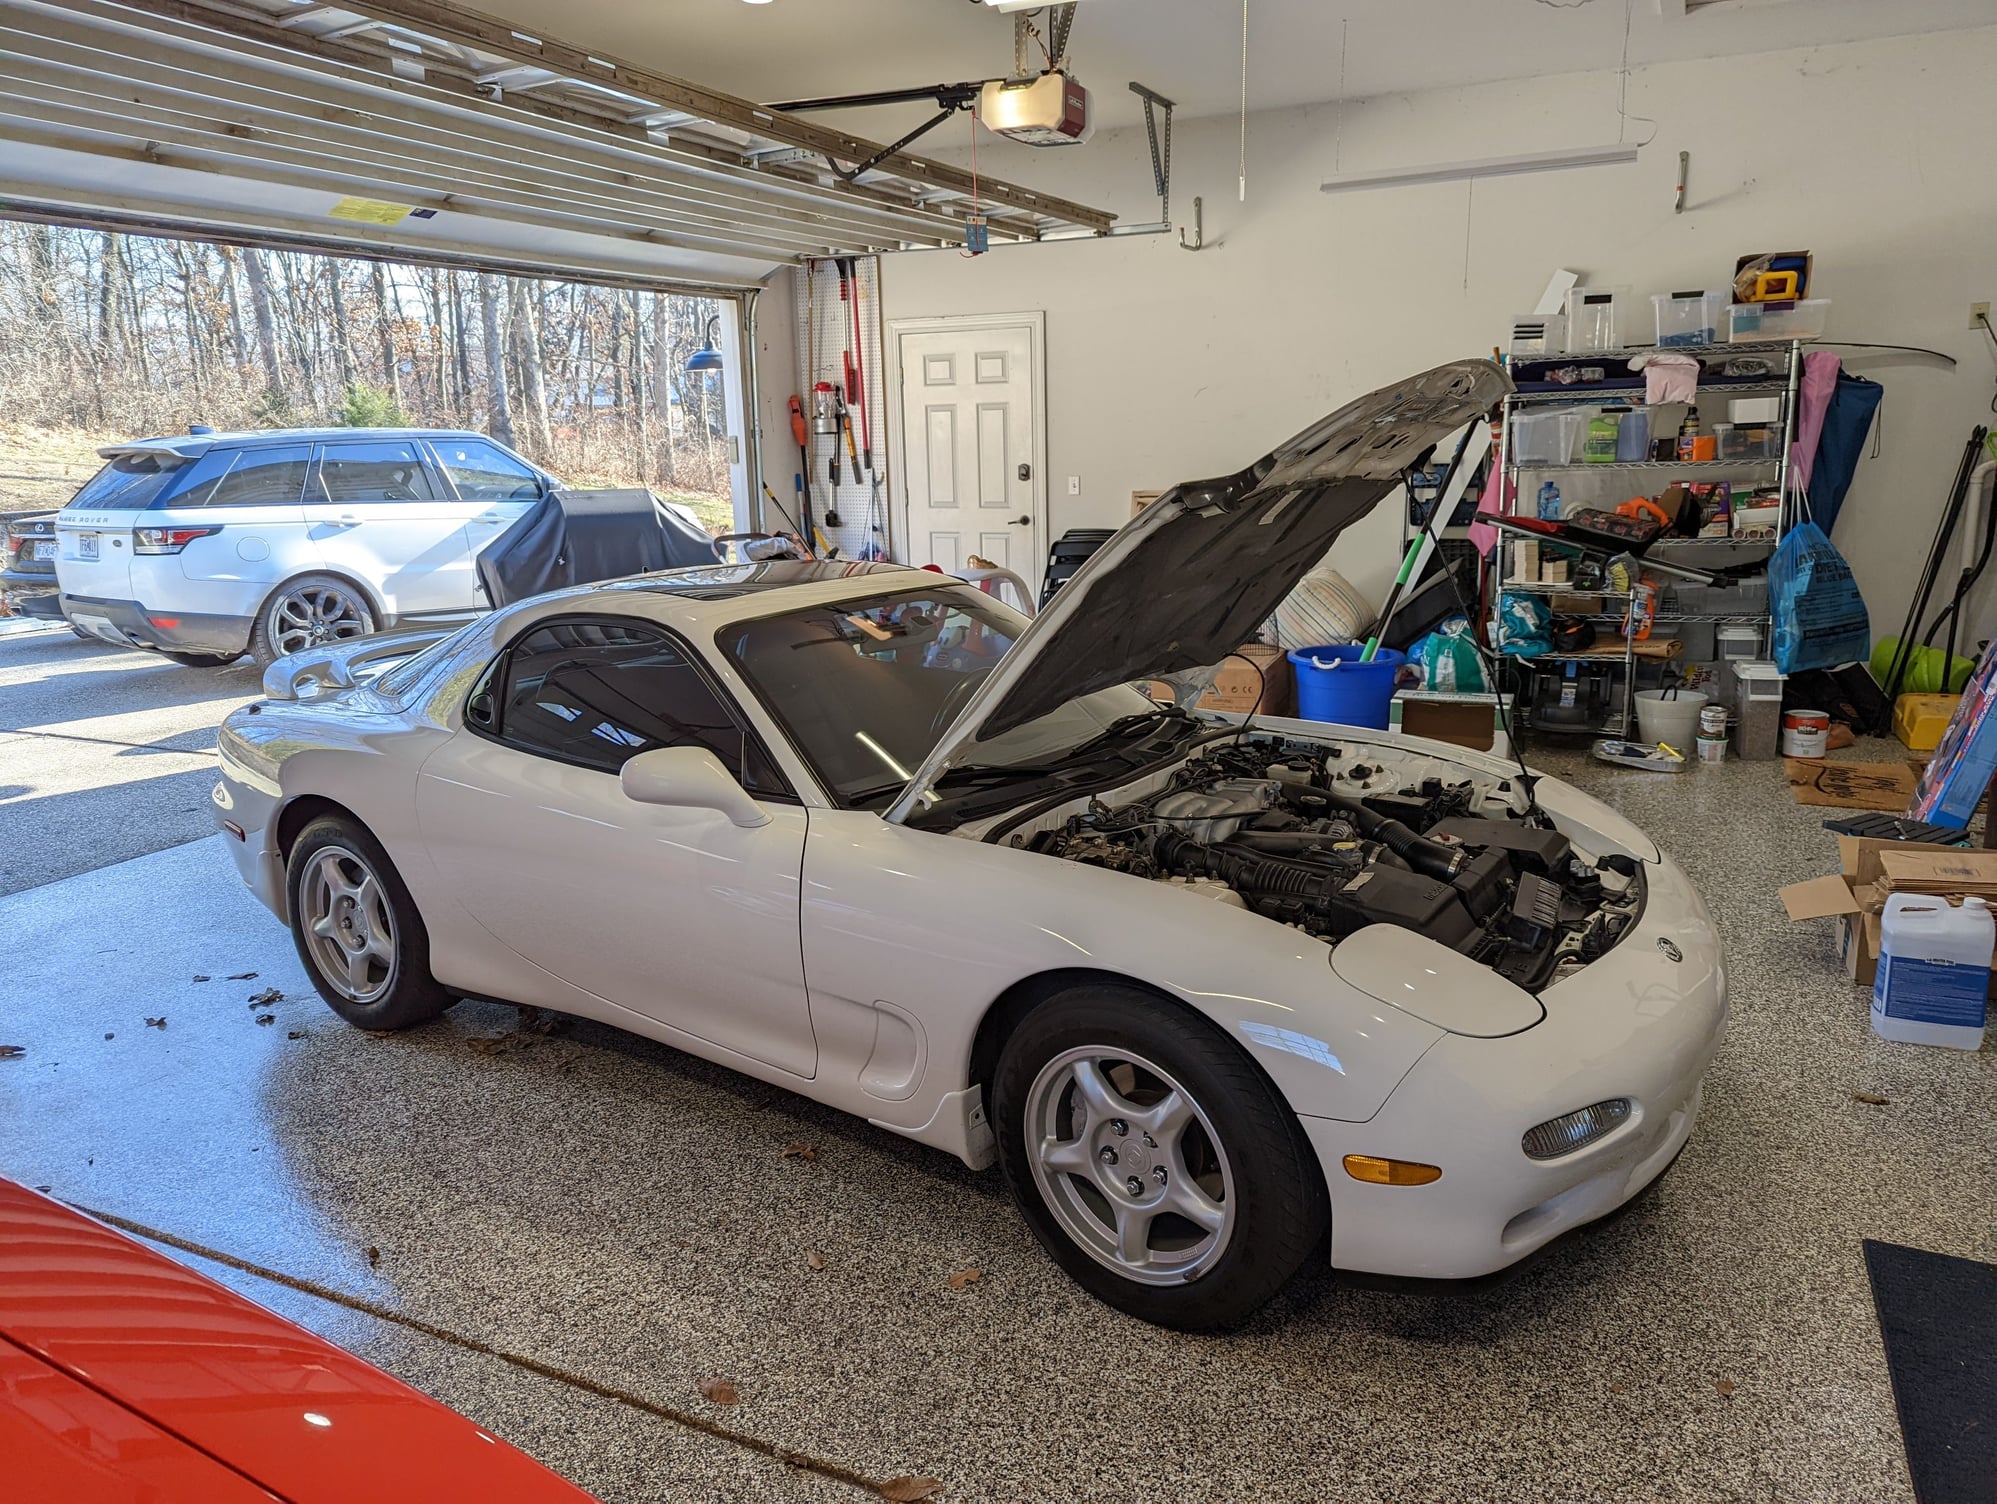 1994 Mazda RX-7 - 1994 Chaste white touring 29k original mile - Used - VIN JM1FD3334R0300286 - 29,077 Miles - Other - 2WD - Manual - Coupe - White - St. Peters, MO 63303, United States